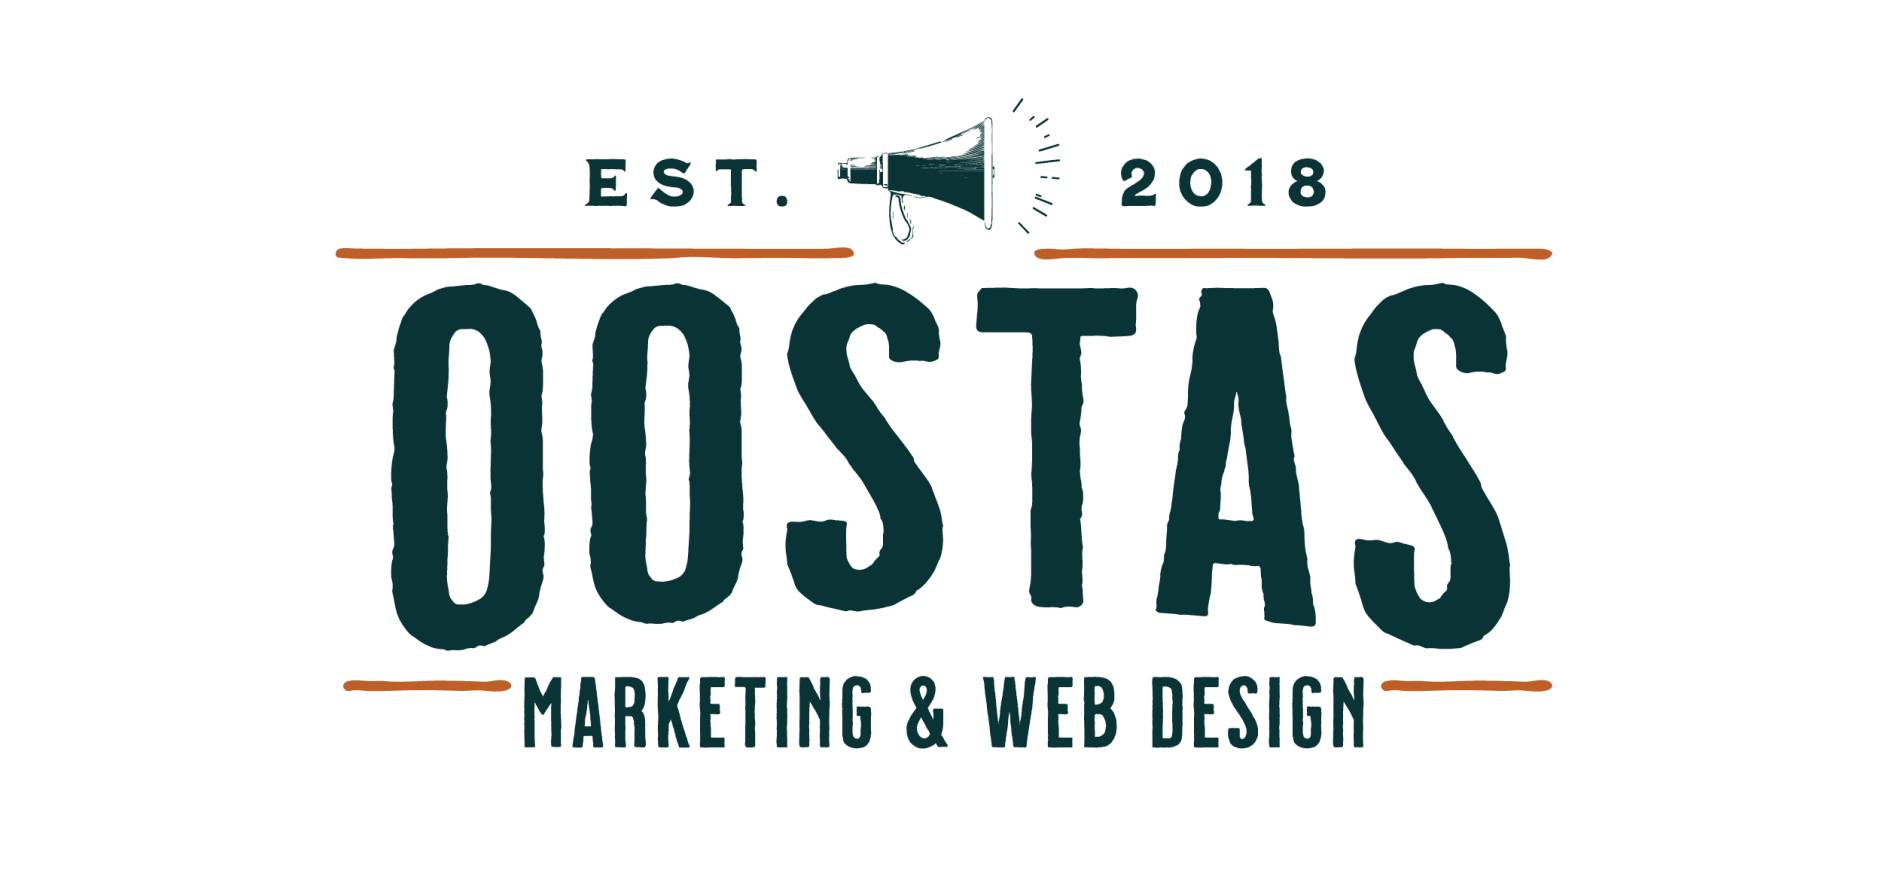 A logo for a company called oostas marketing and web design